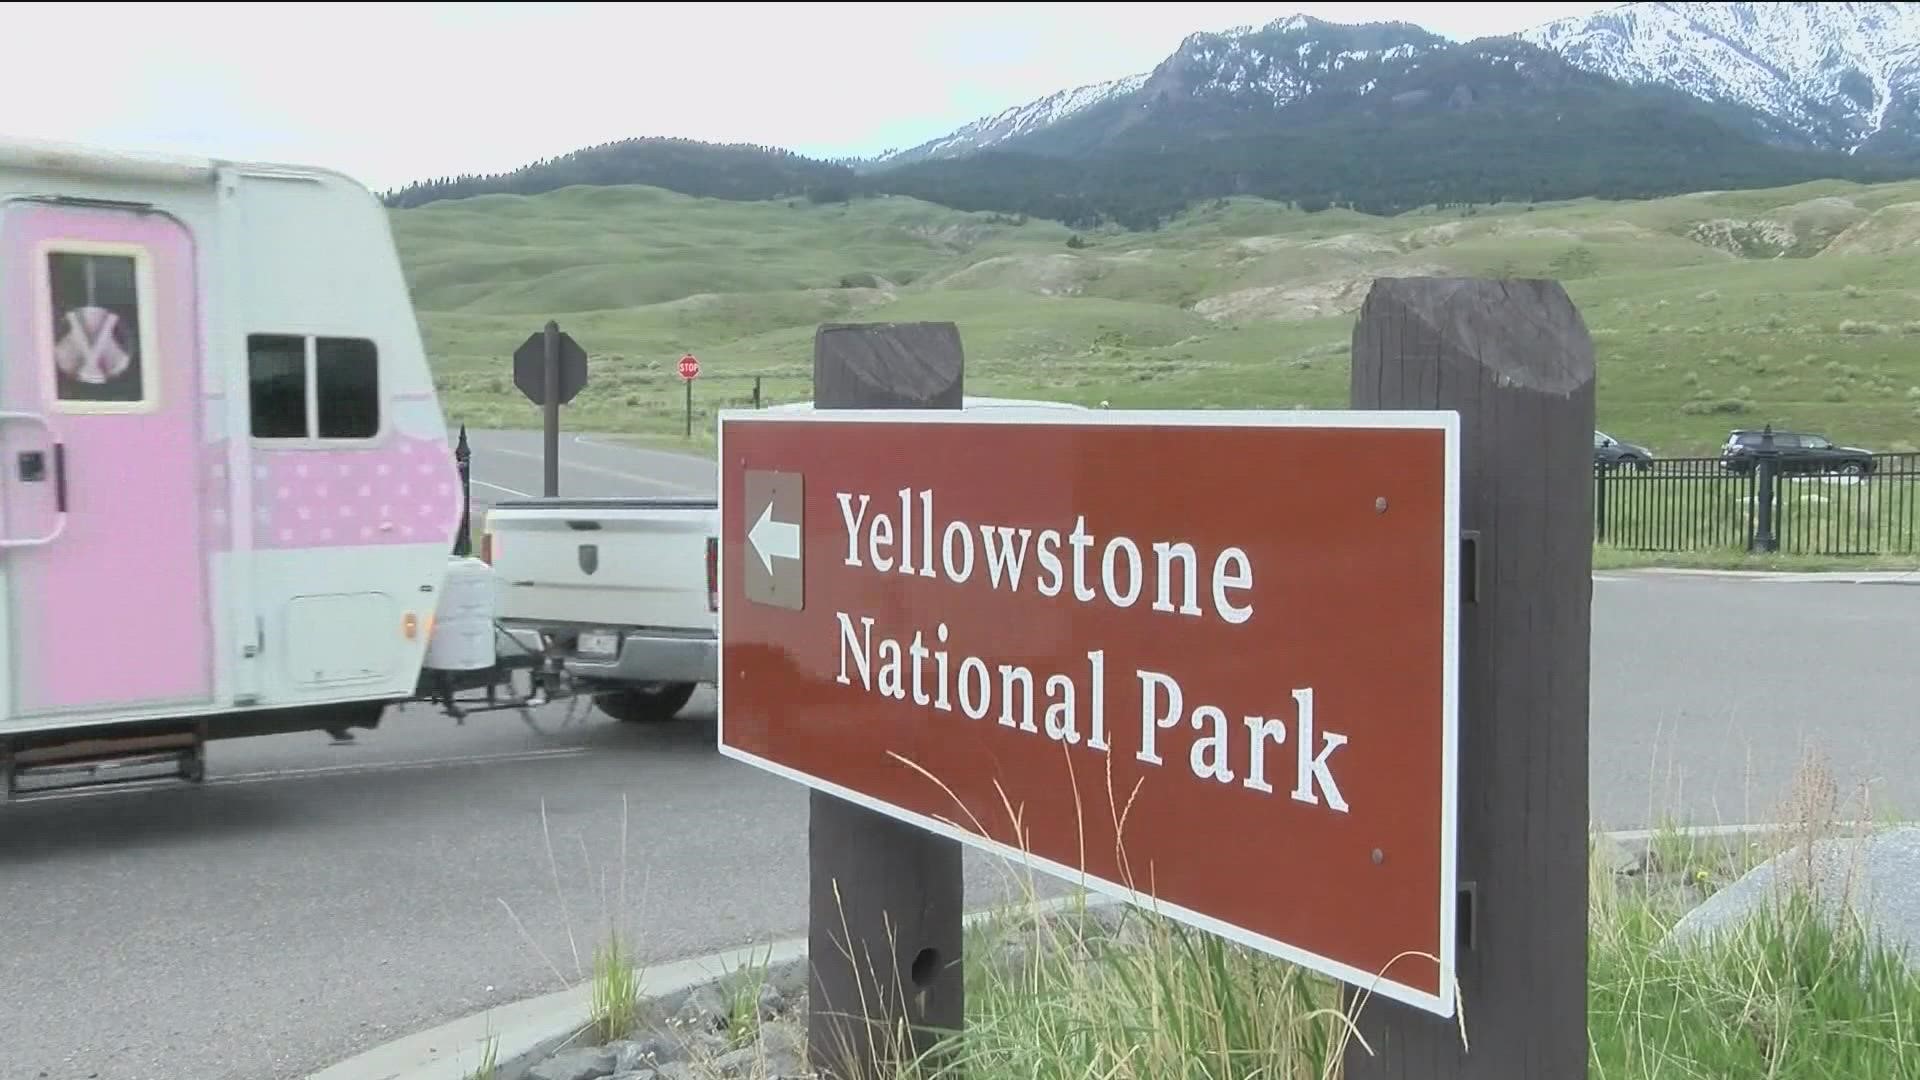 The south loop of the national park, from areas including Cody, West Yellowstone, and Grand Teton, are now back open to the public.